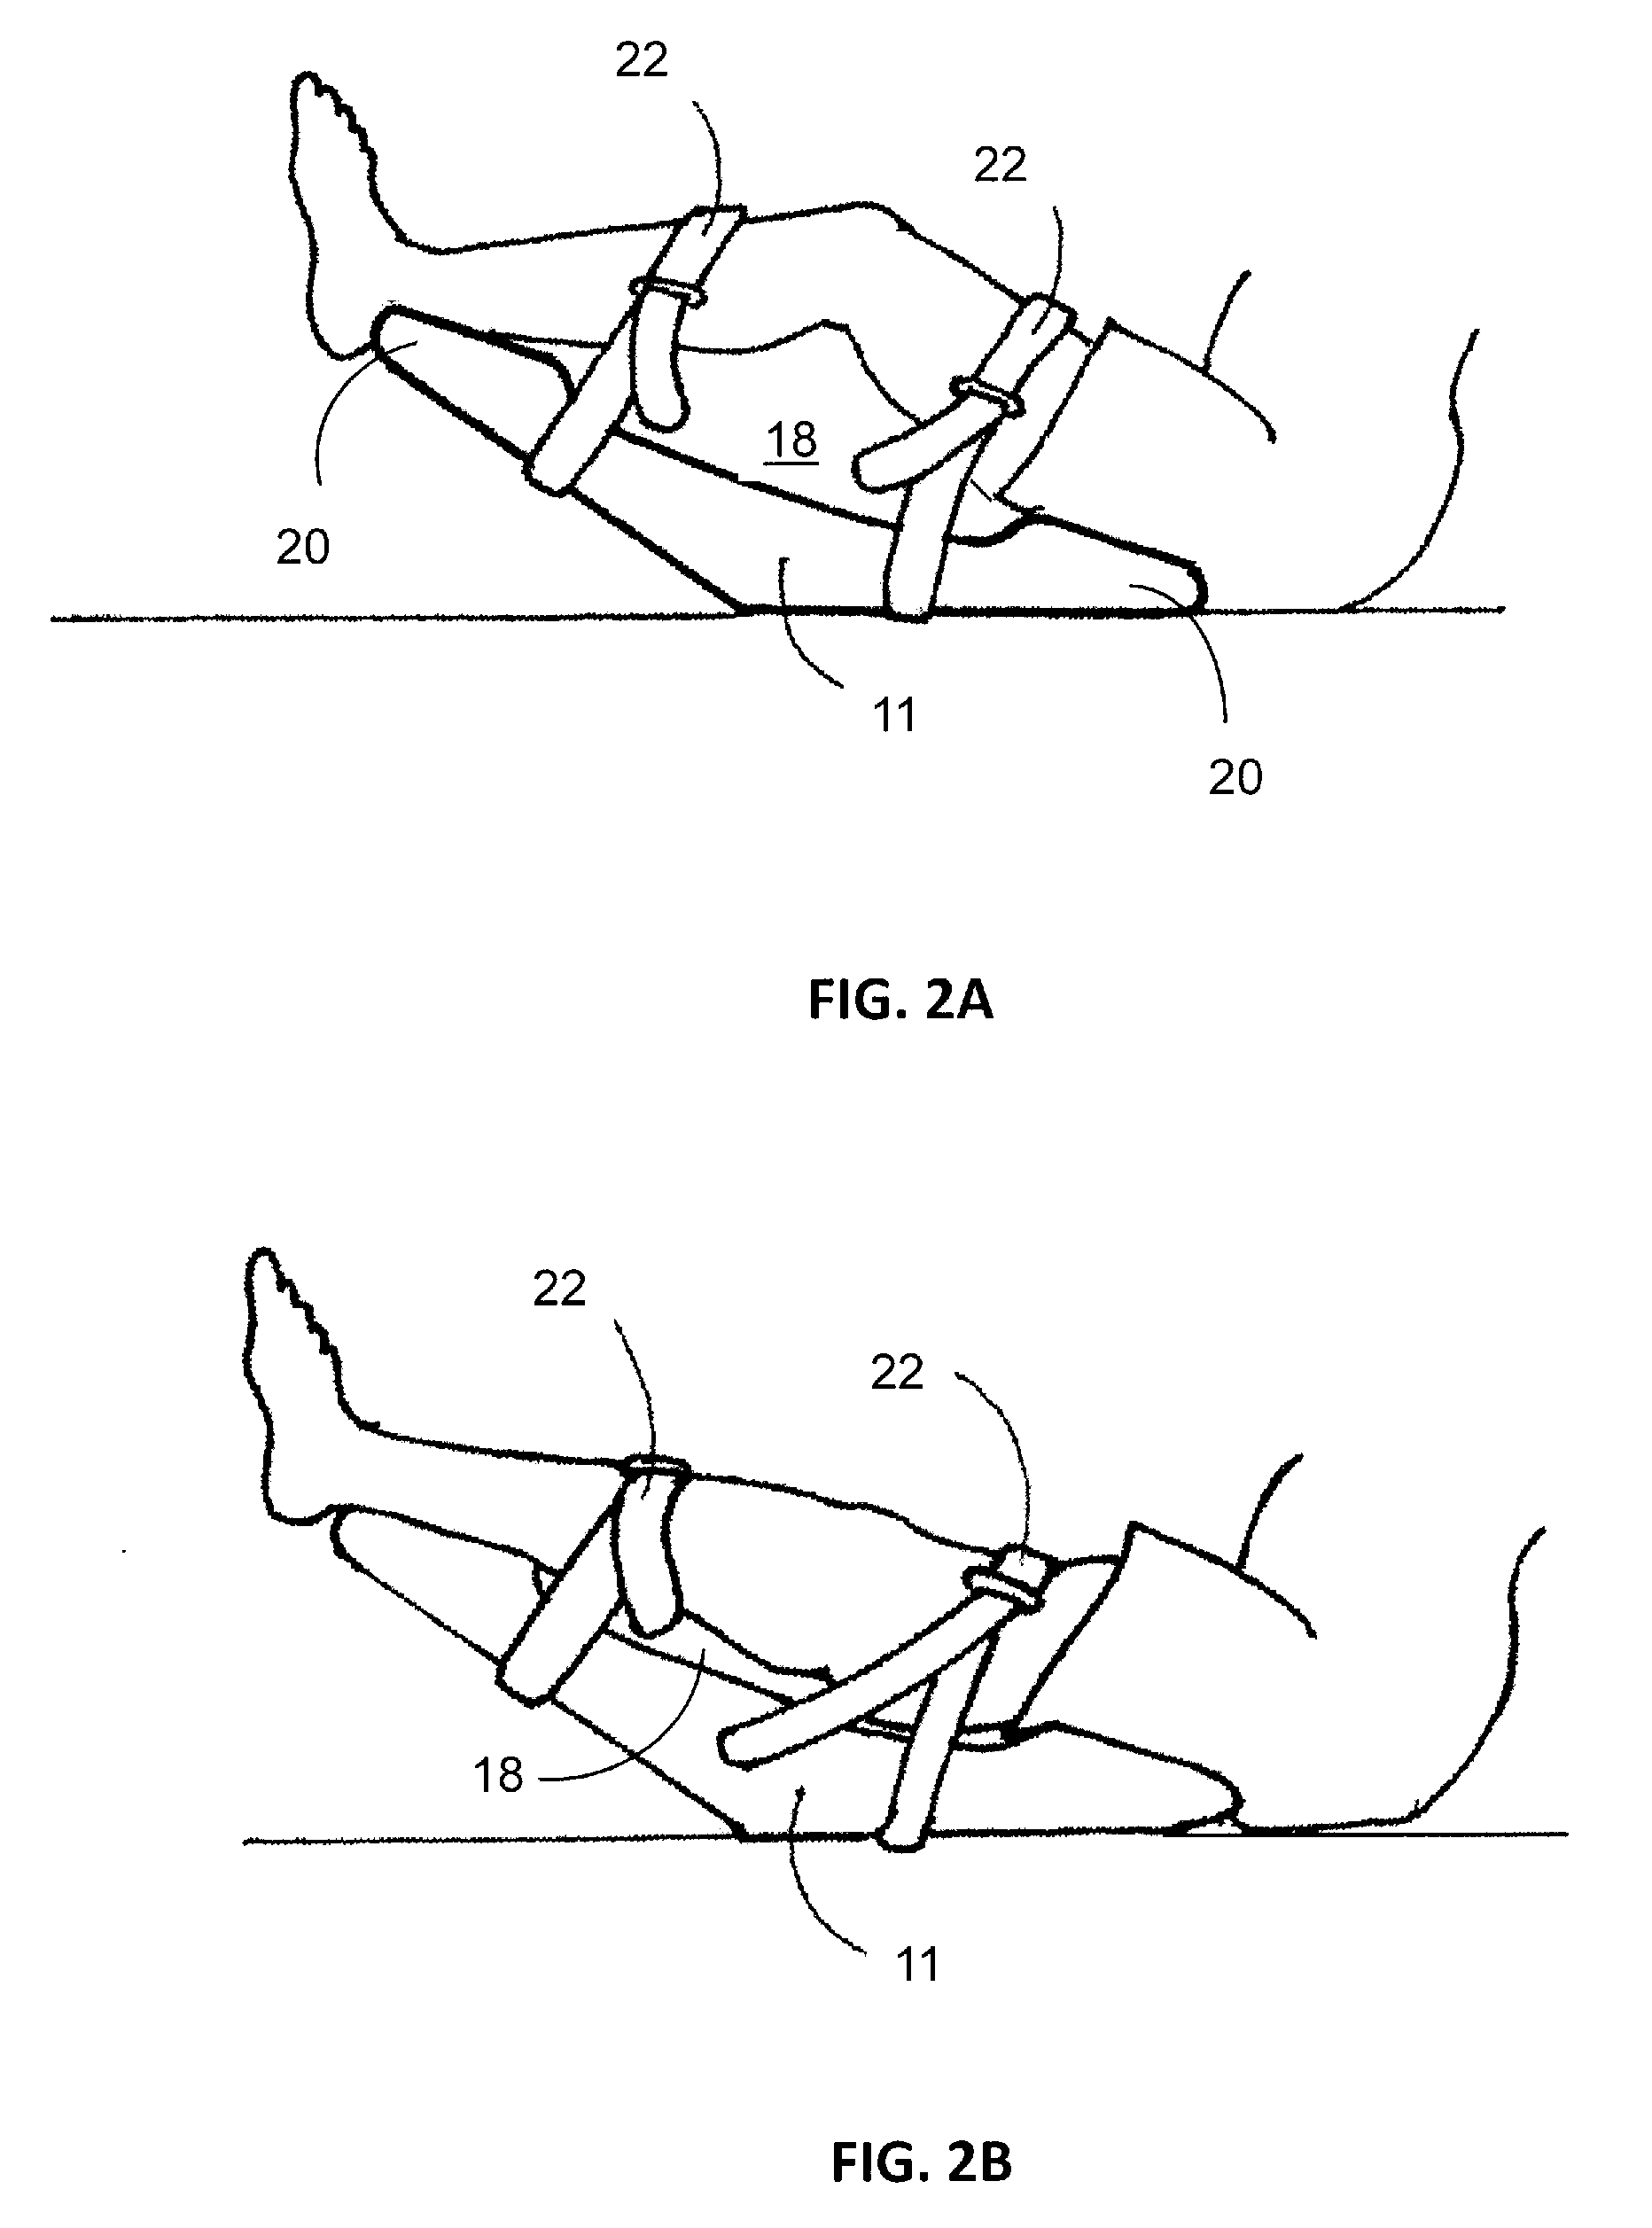 Methods and Devices for Treating Pathological Conditions of the Human Knee